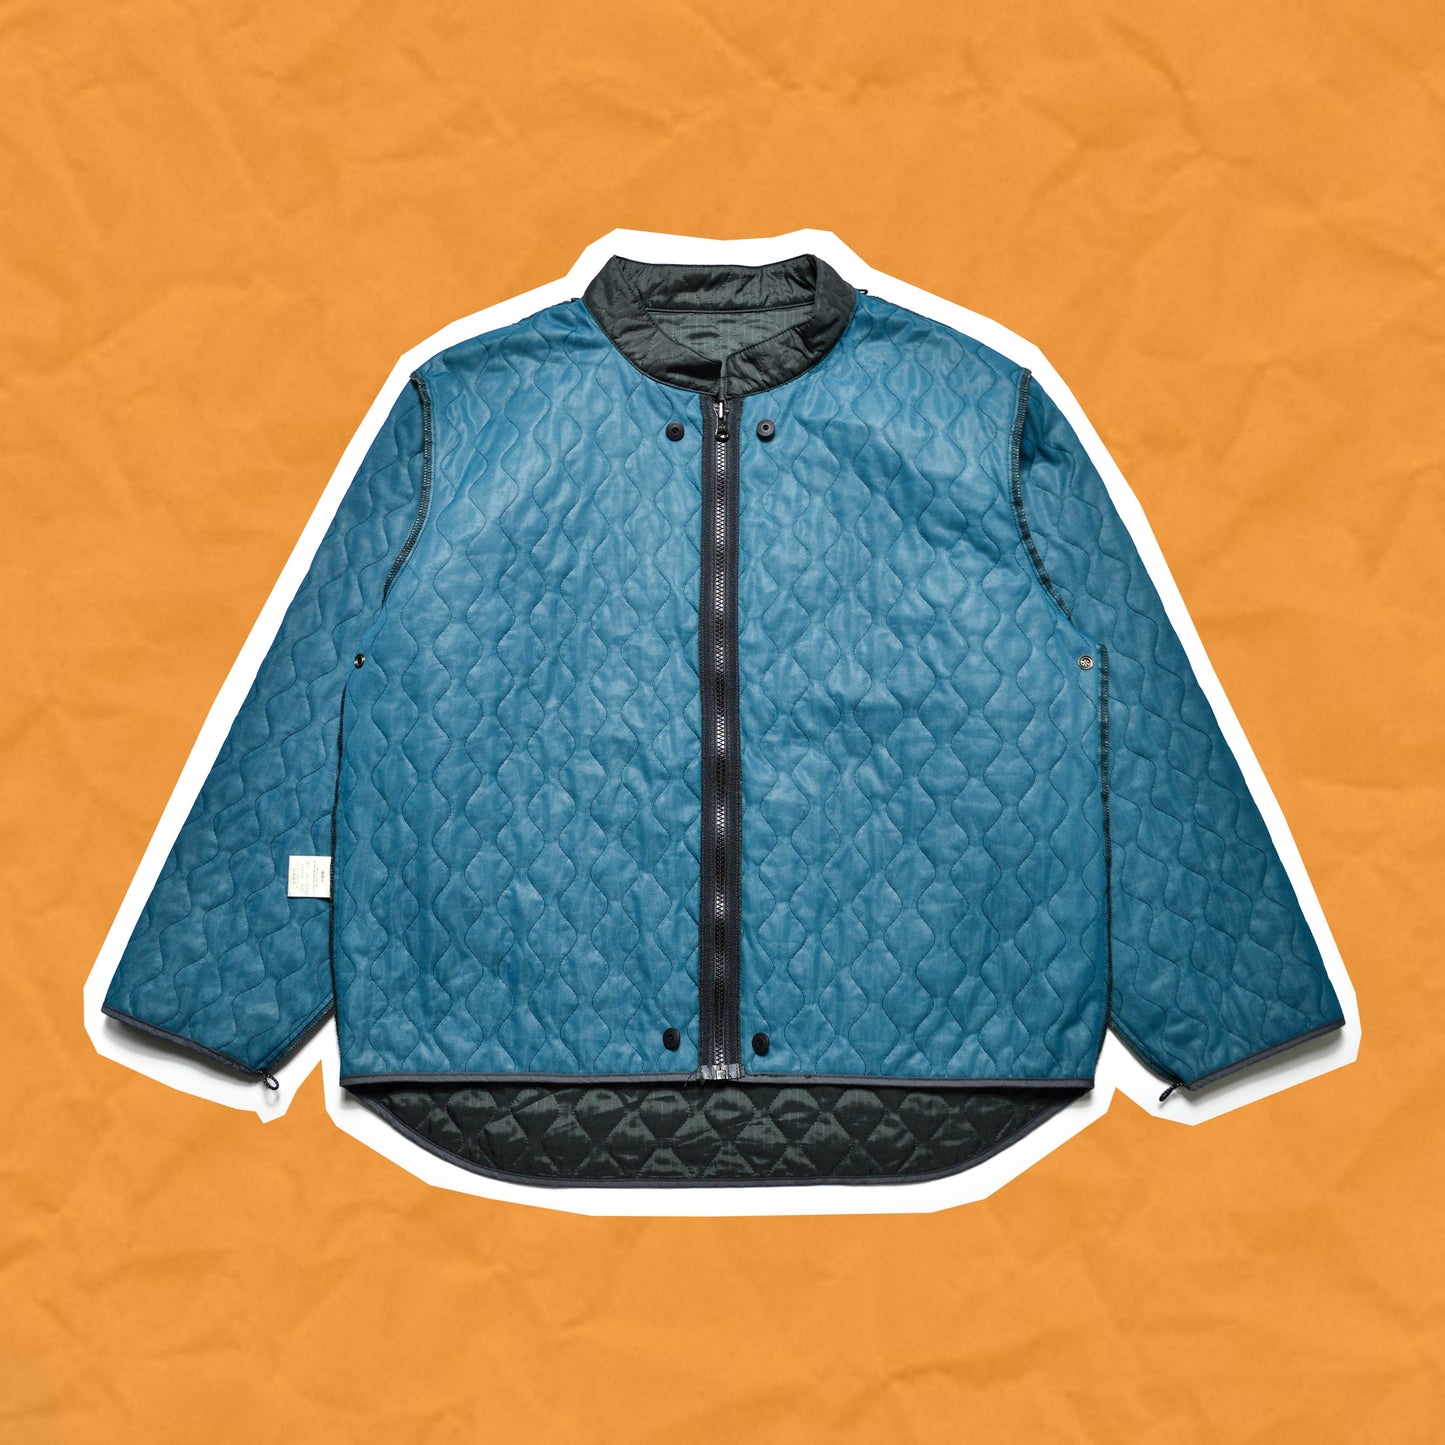 Levi's Engineered Jeans Metallic Masked Jacket with a Quilted Liner